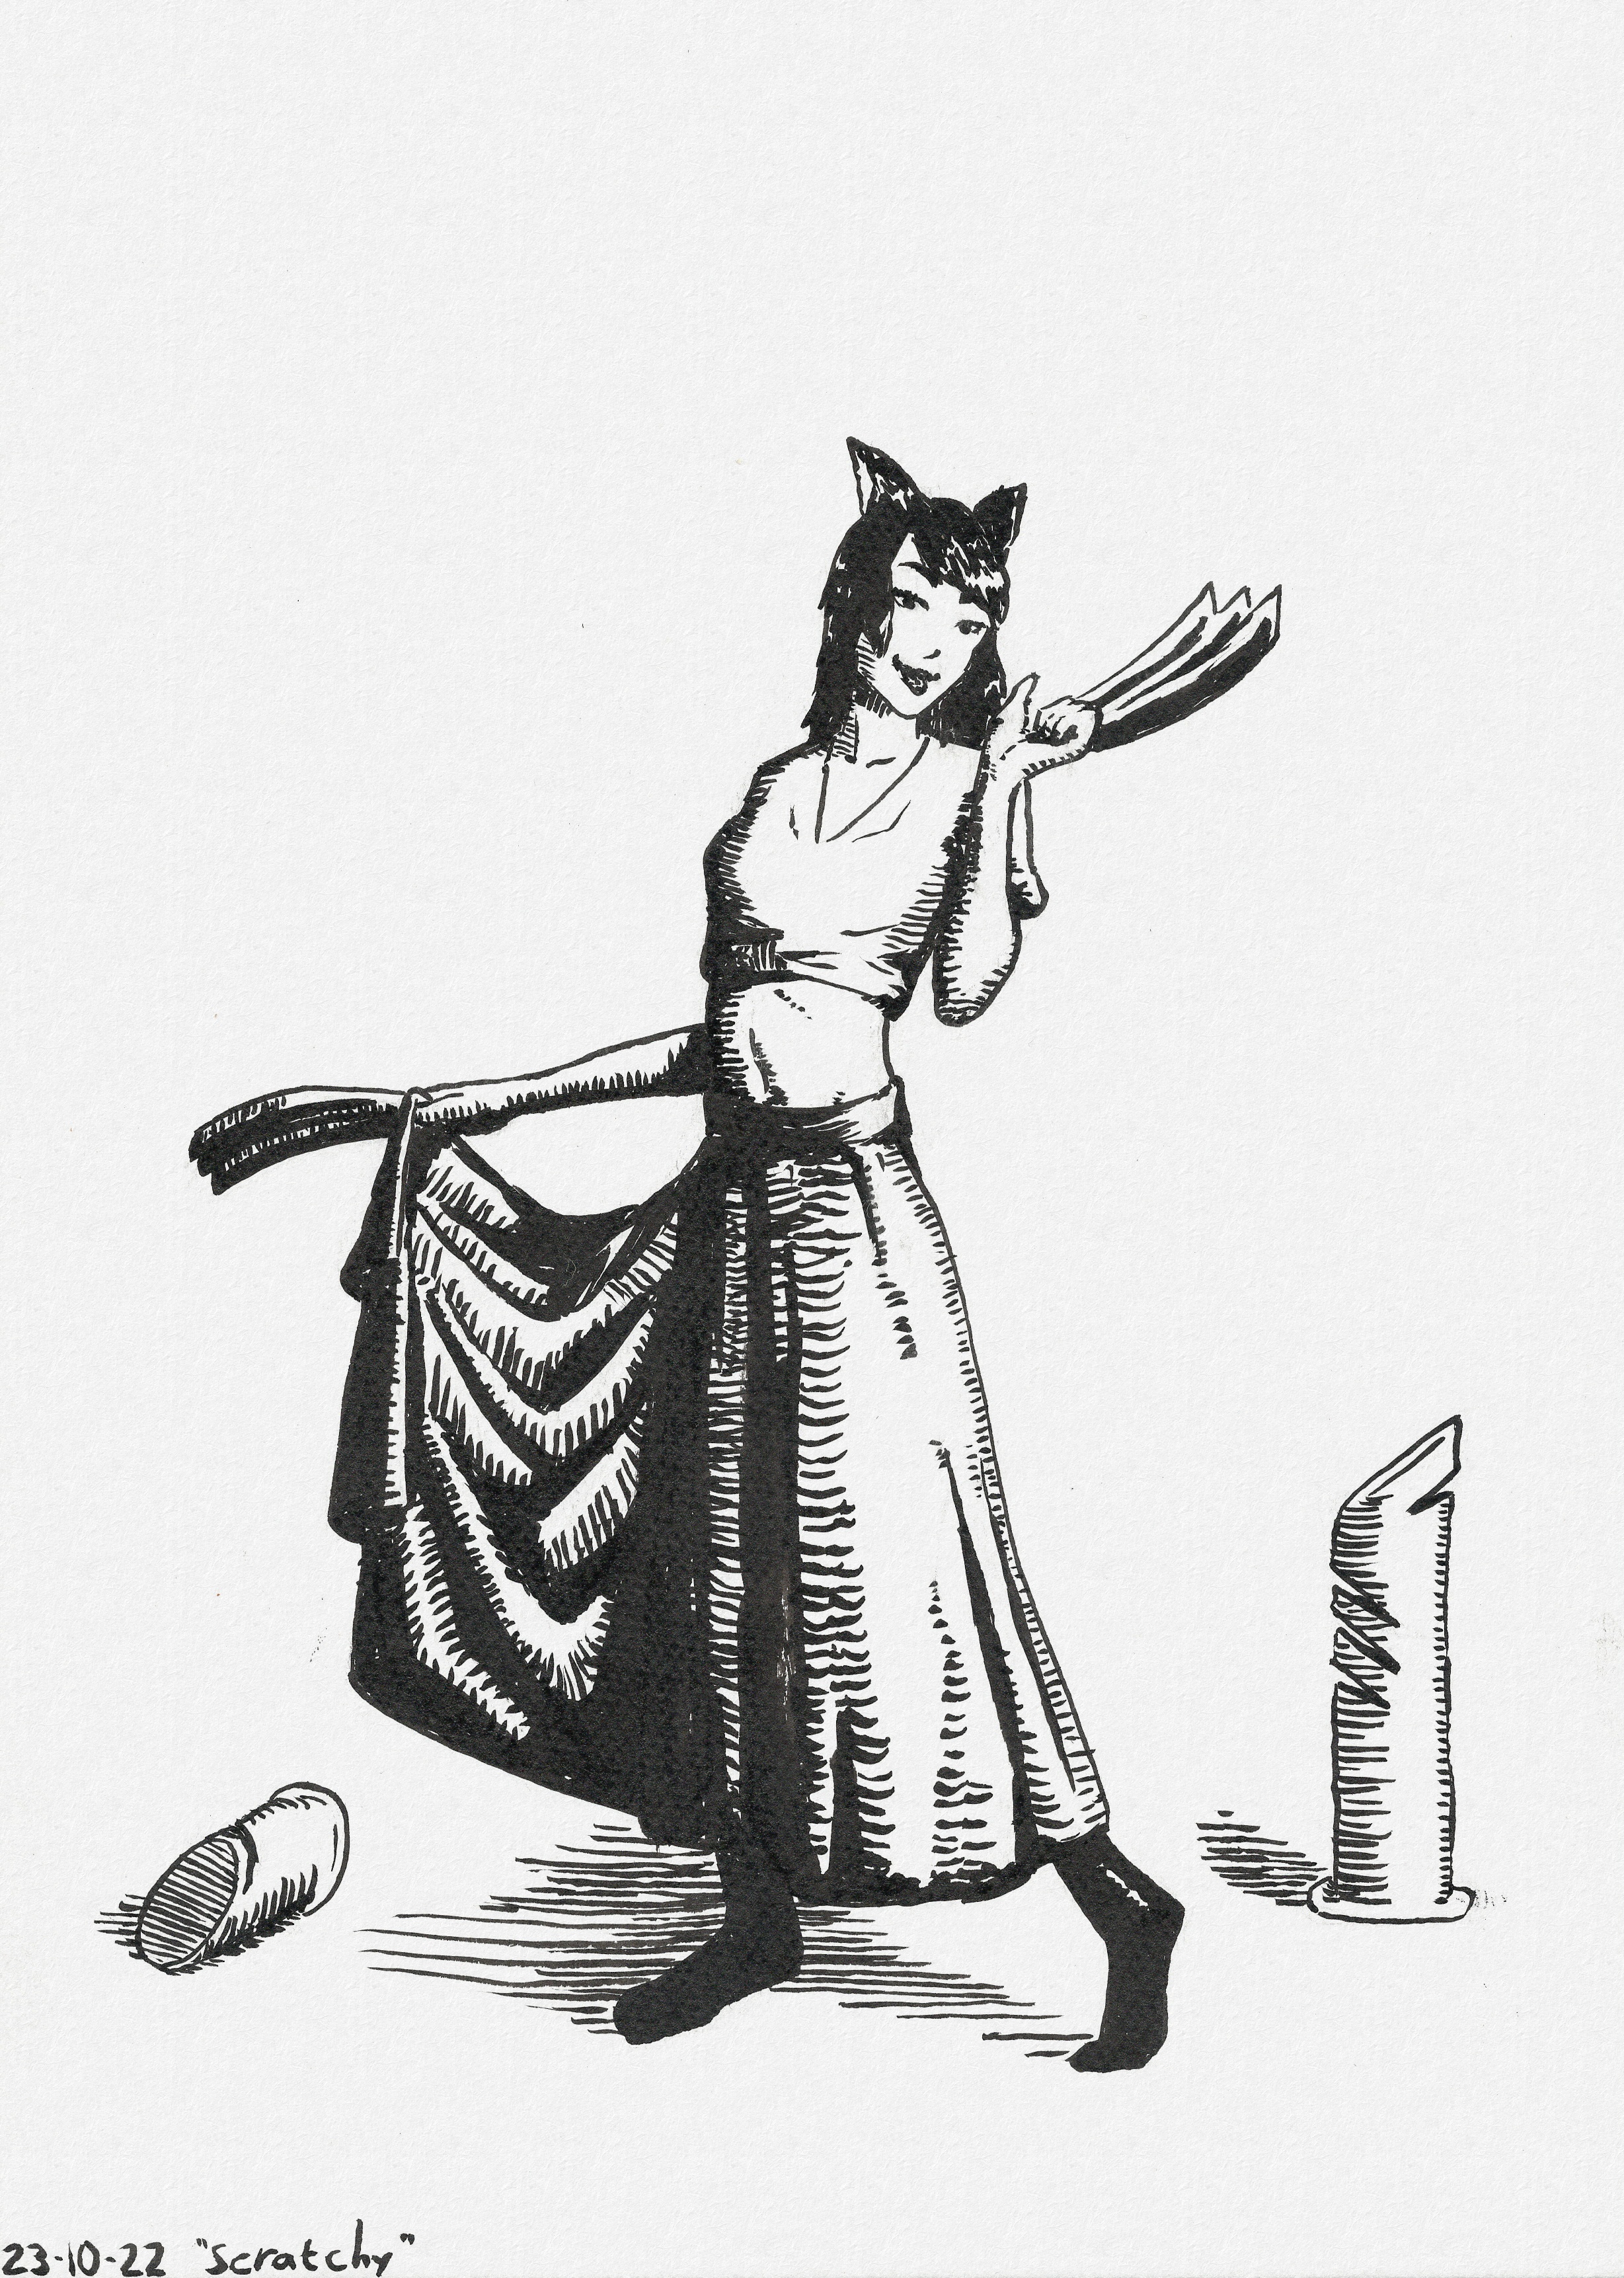 A lady with cat ears lifting her skirt to the side with a whimsical expression on her face. She has Wolverine-style claw blades on her hands and a cat scratching post lies cut in half in the background.